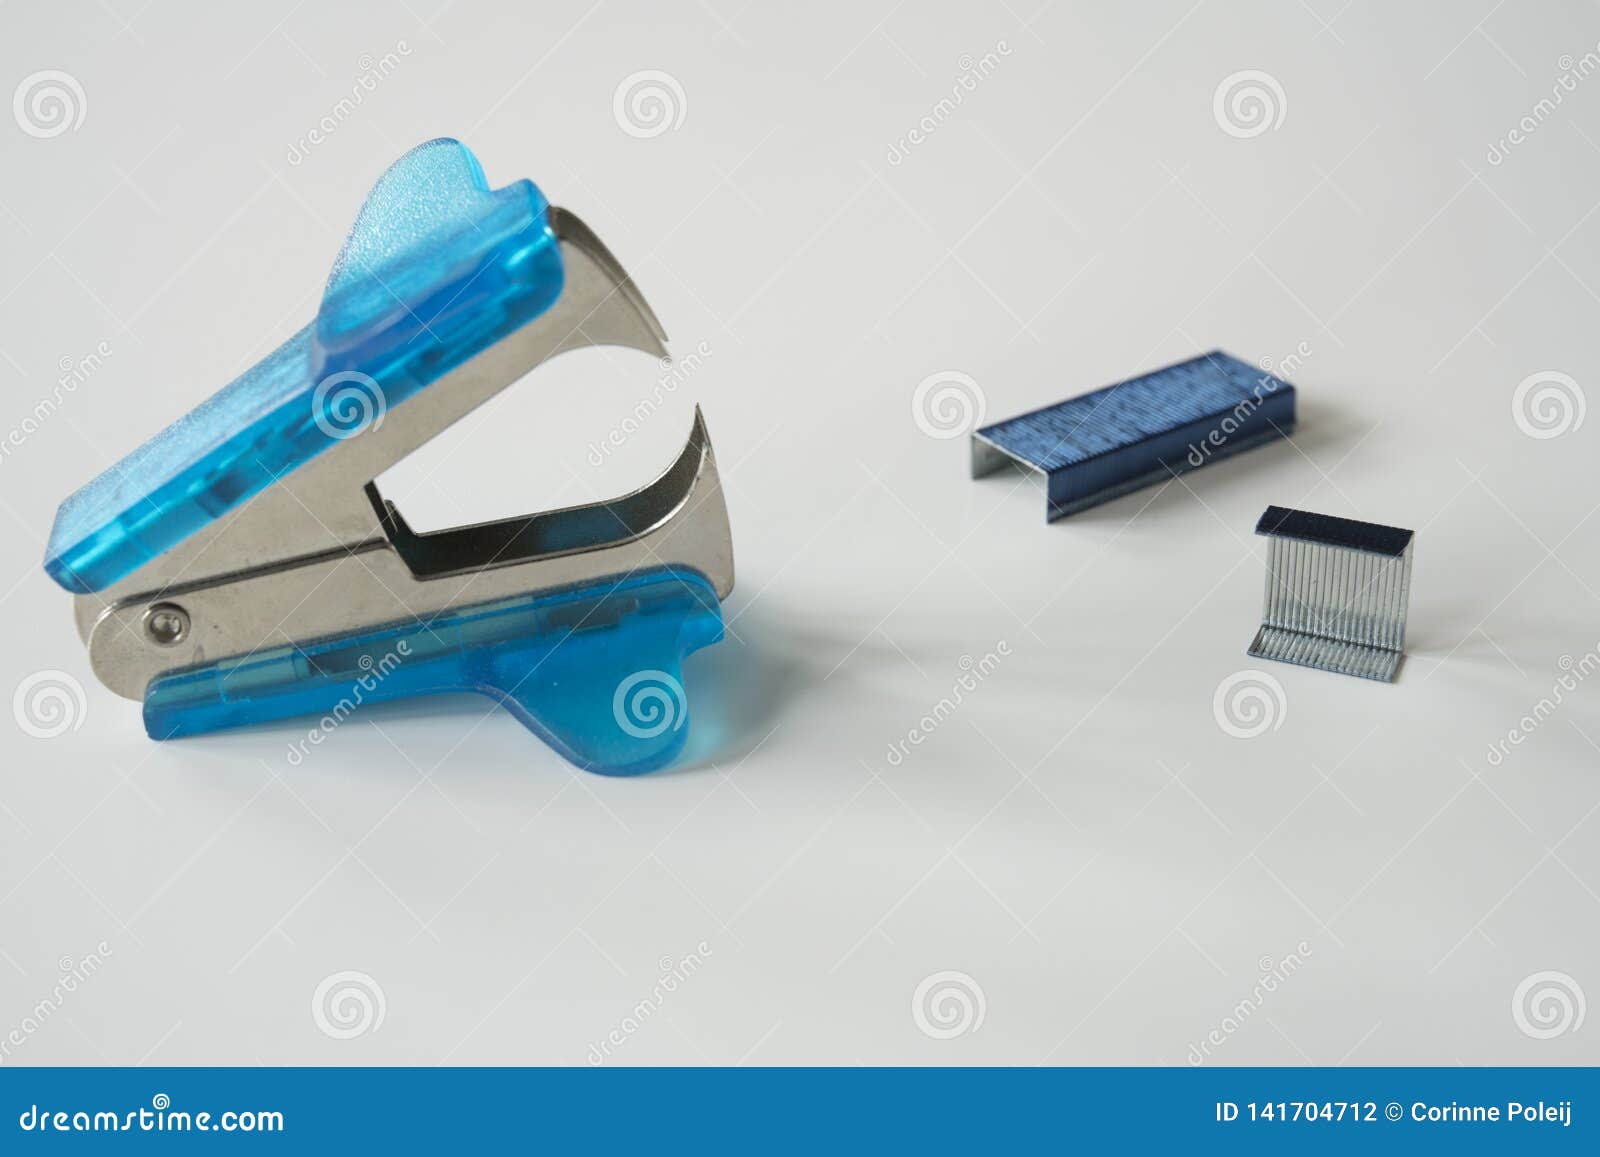 Close Up Blue Anti Stapler For Removing Staples On A White